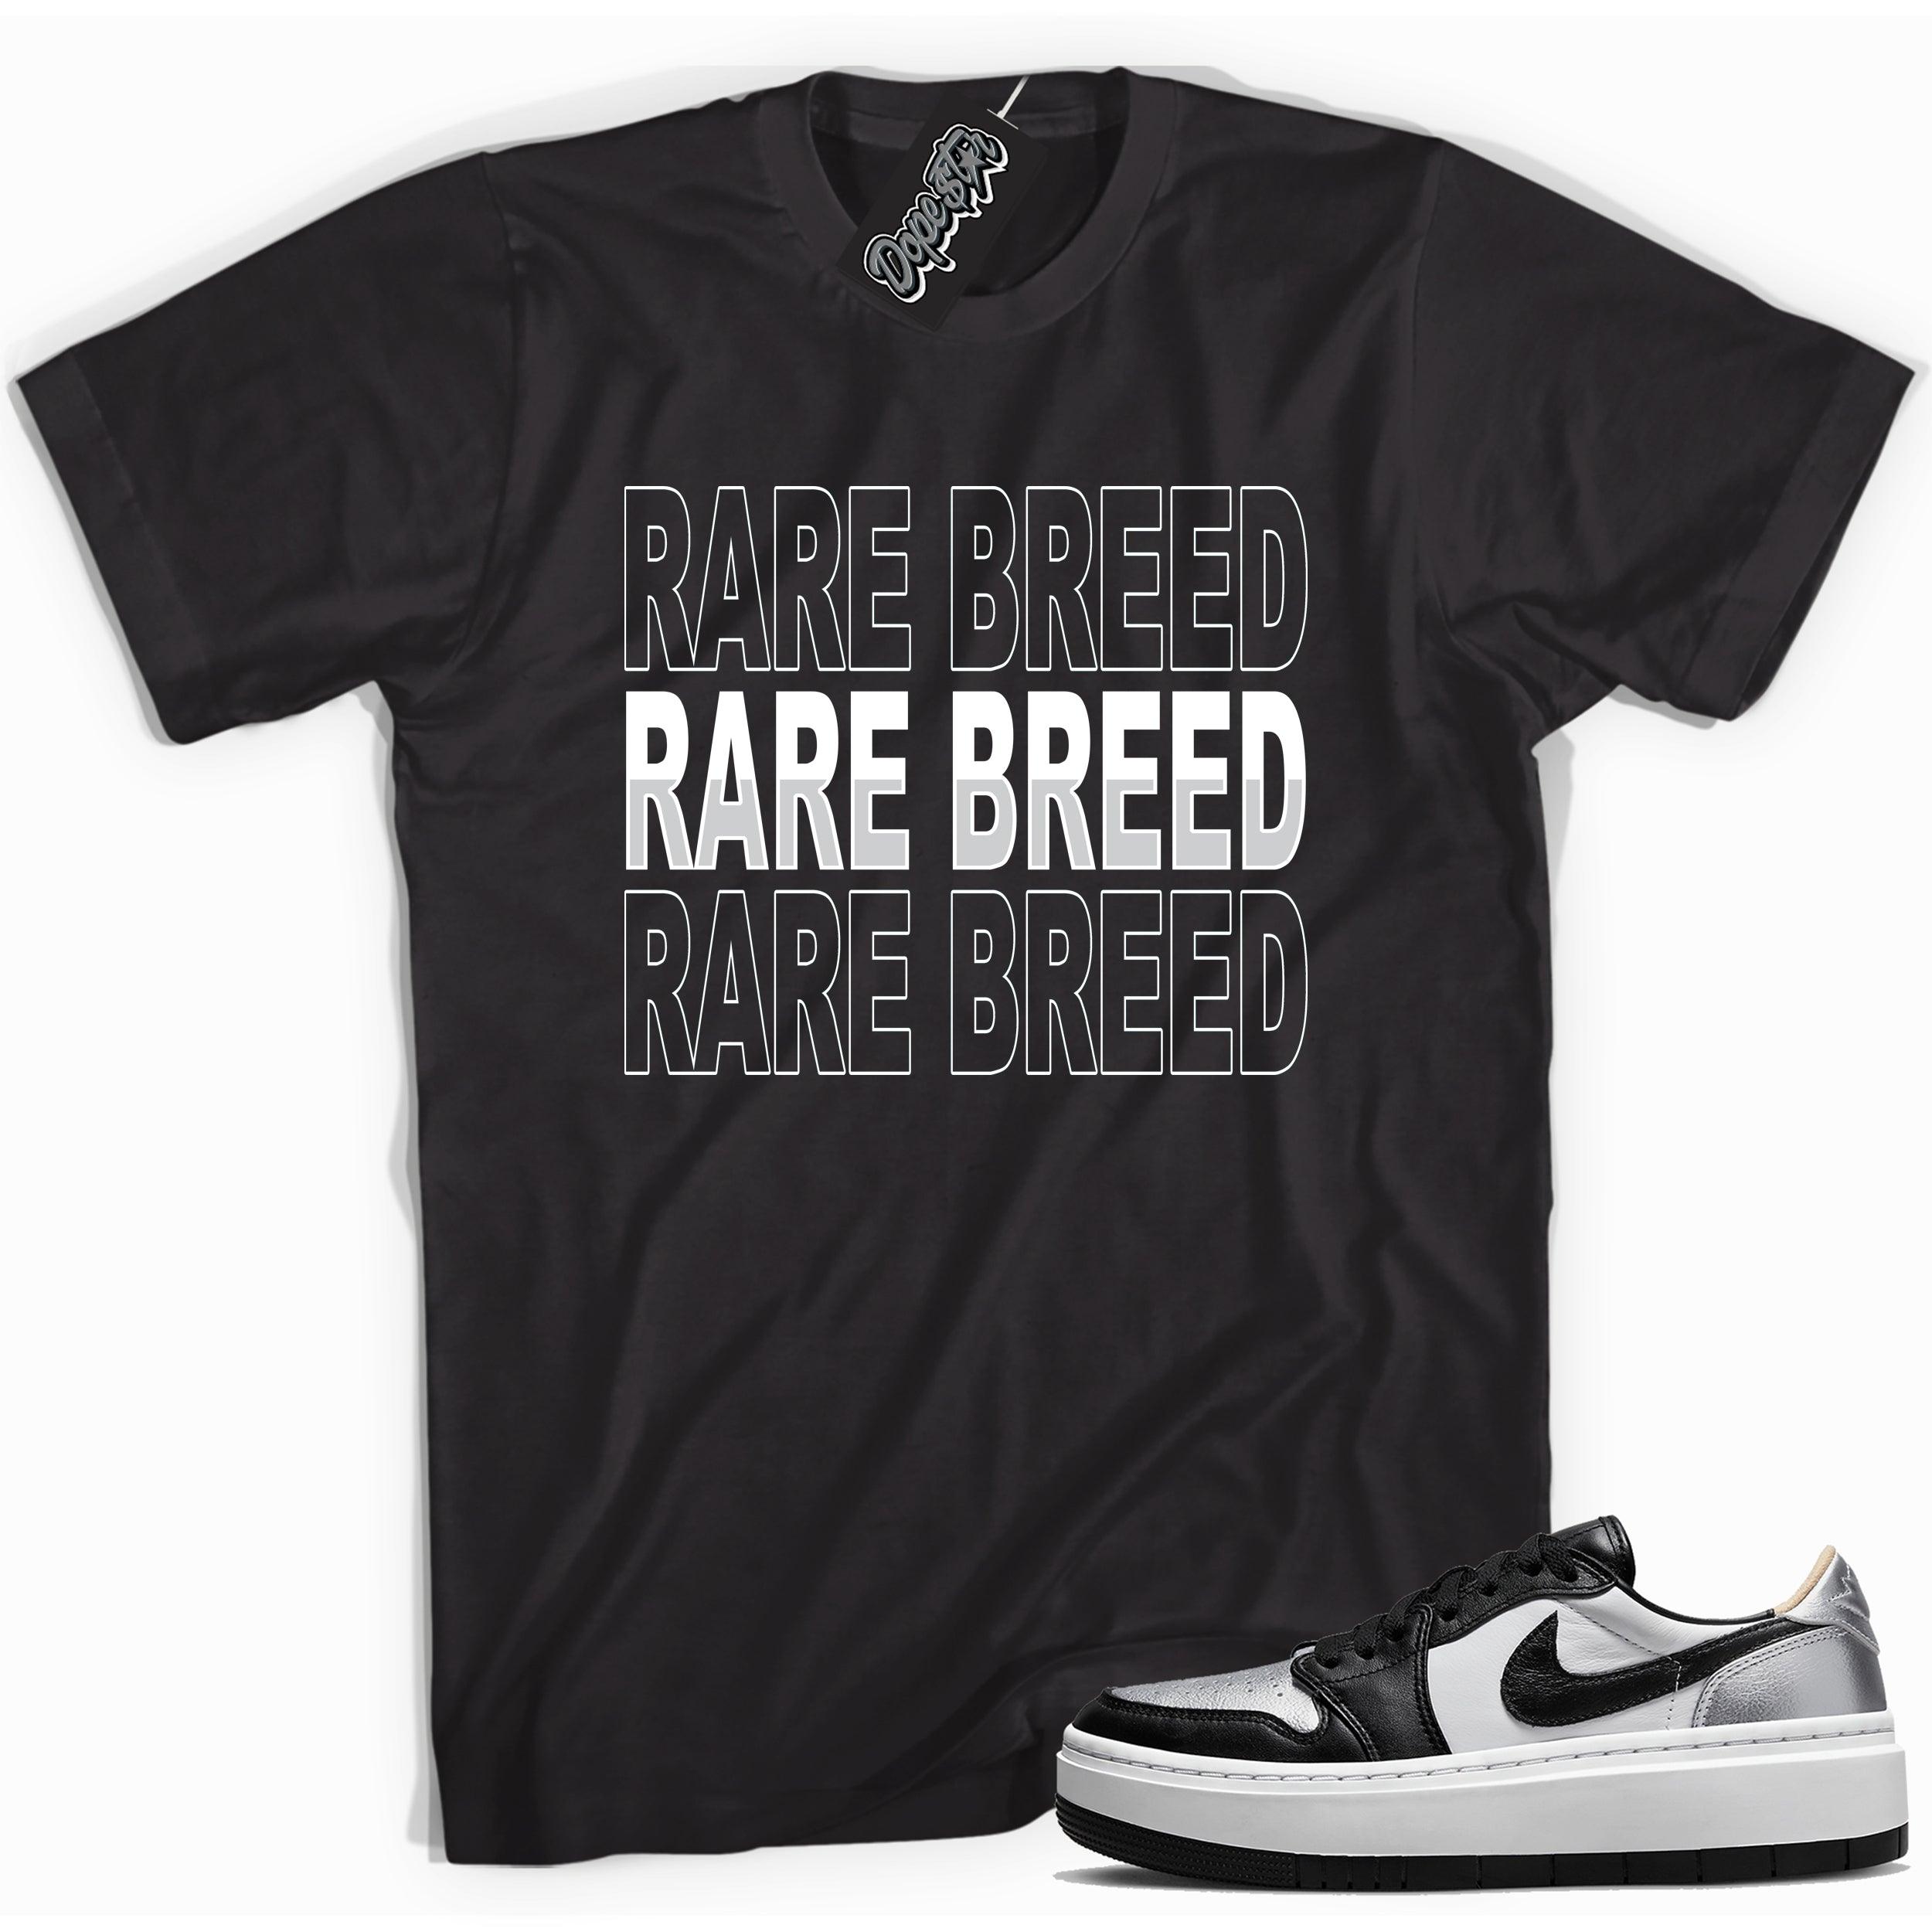 Cool black graphic tee with 'rare breed' print, that perfectly matches Air Jordan 1 Elevate Low SE Silver Toe sneakers.